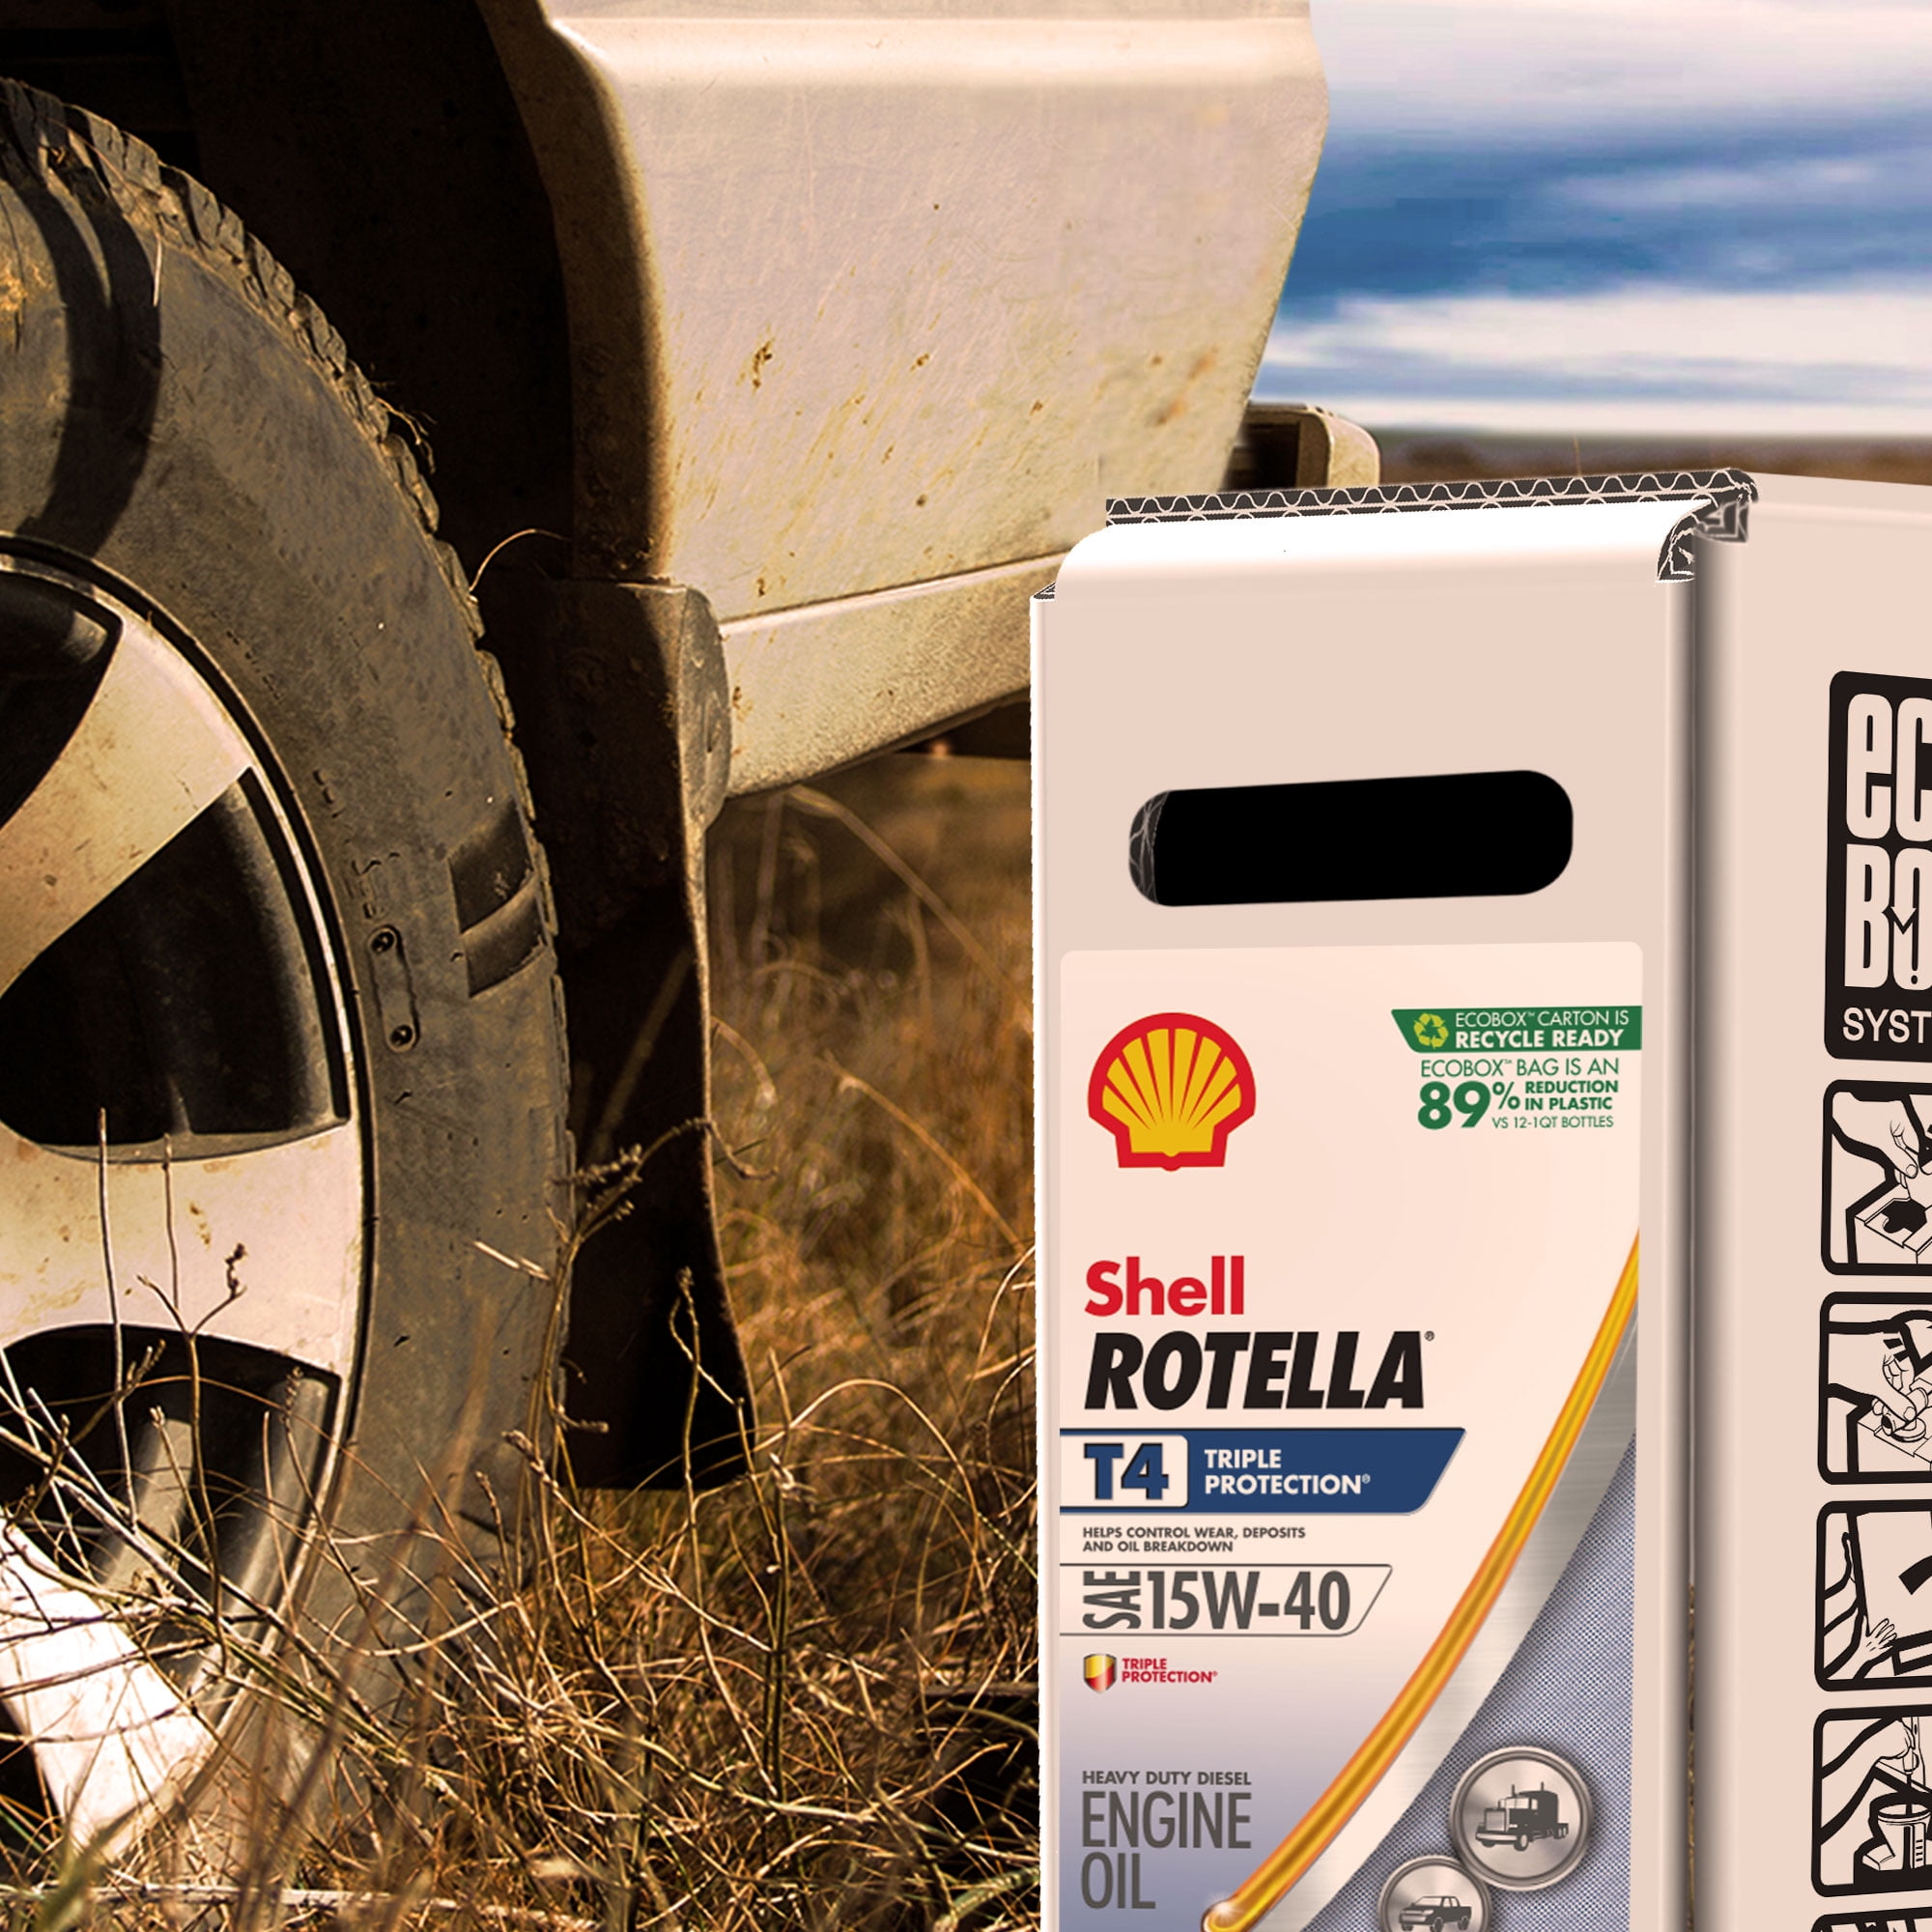 Shell Rotella T4 Triple Protection 15W-40 Diesel Motor Oil, 3 Gallon - 3